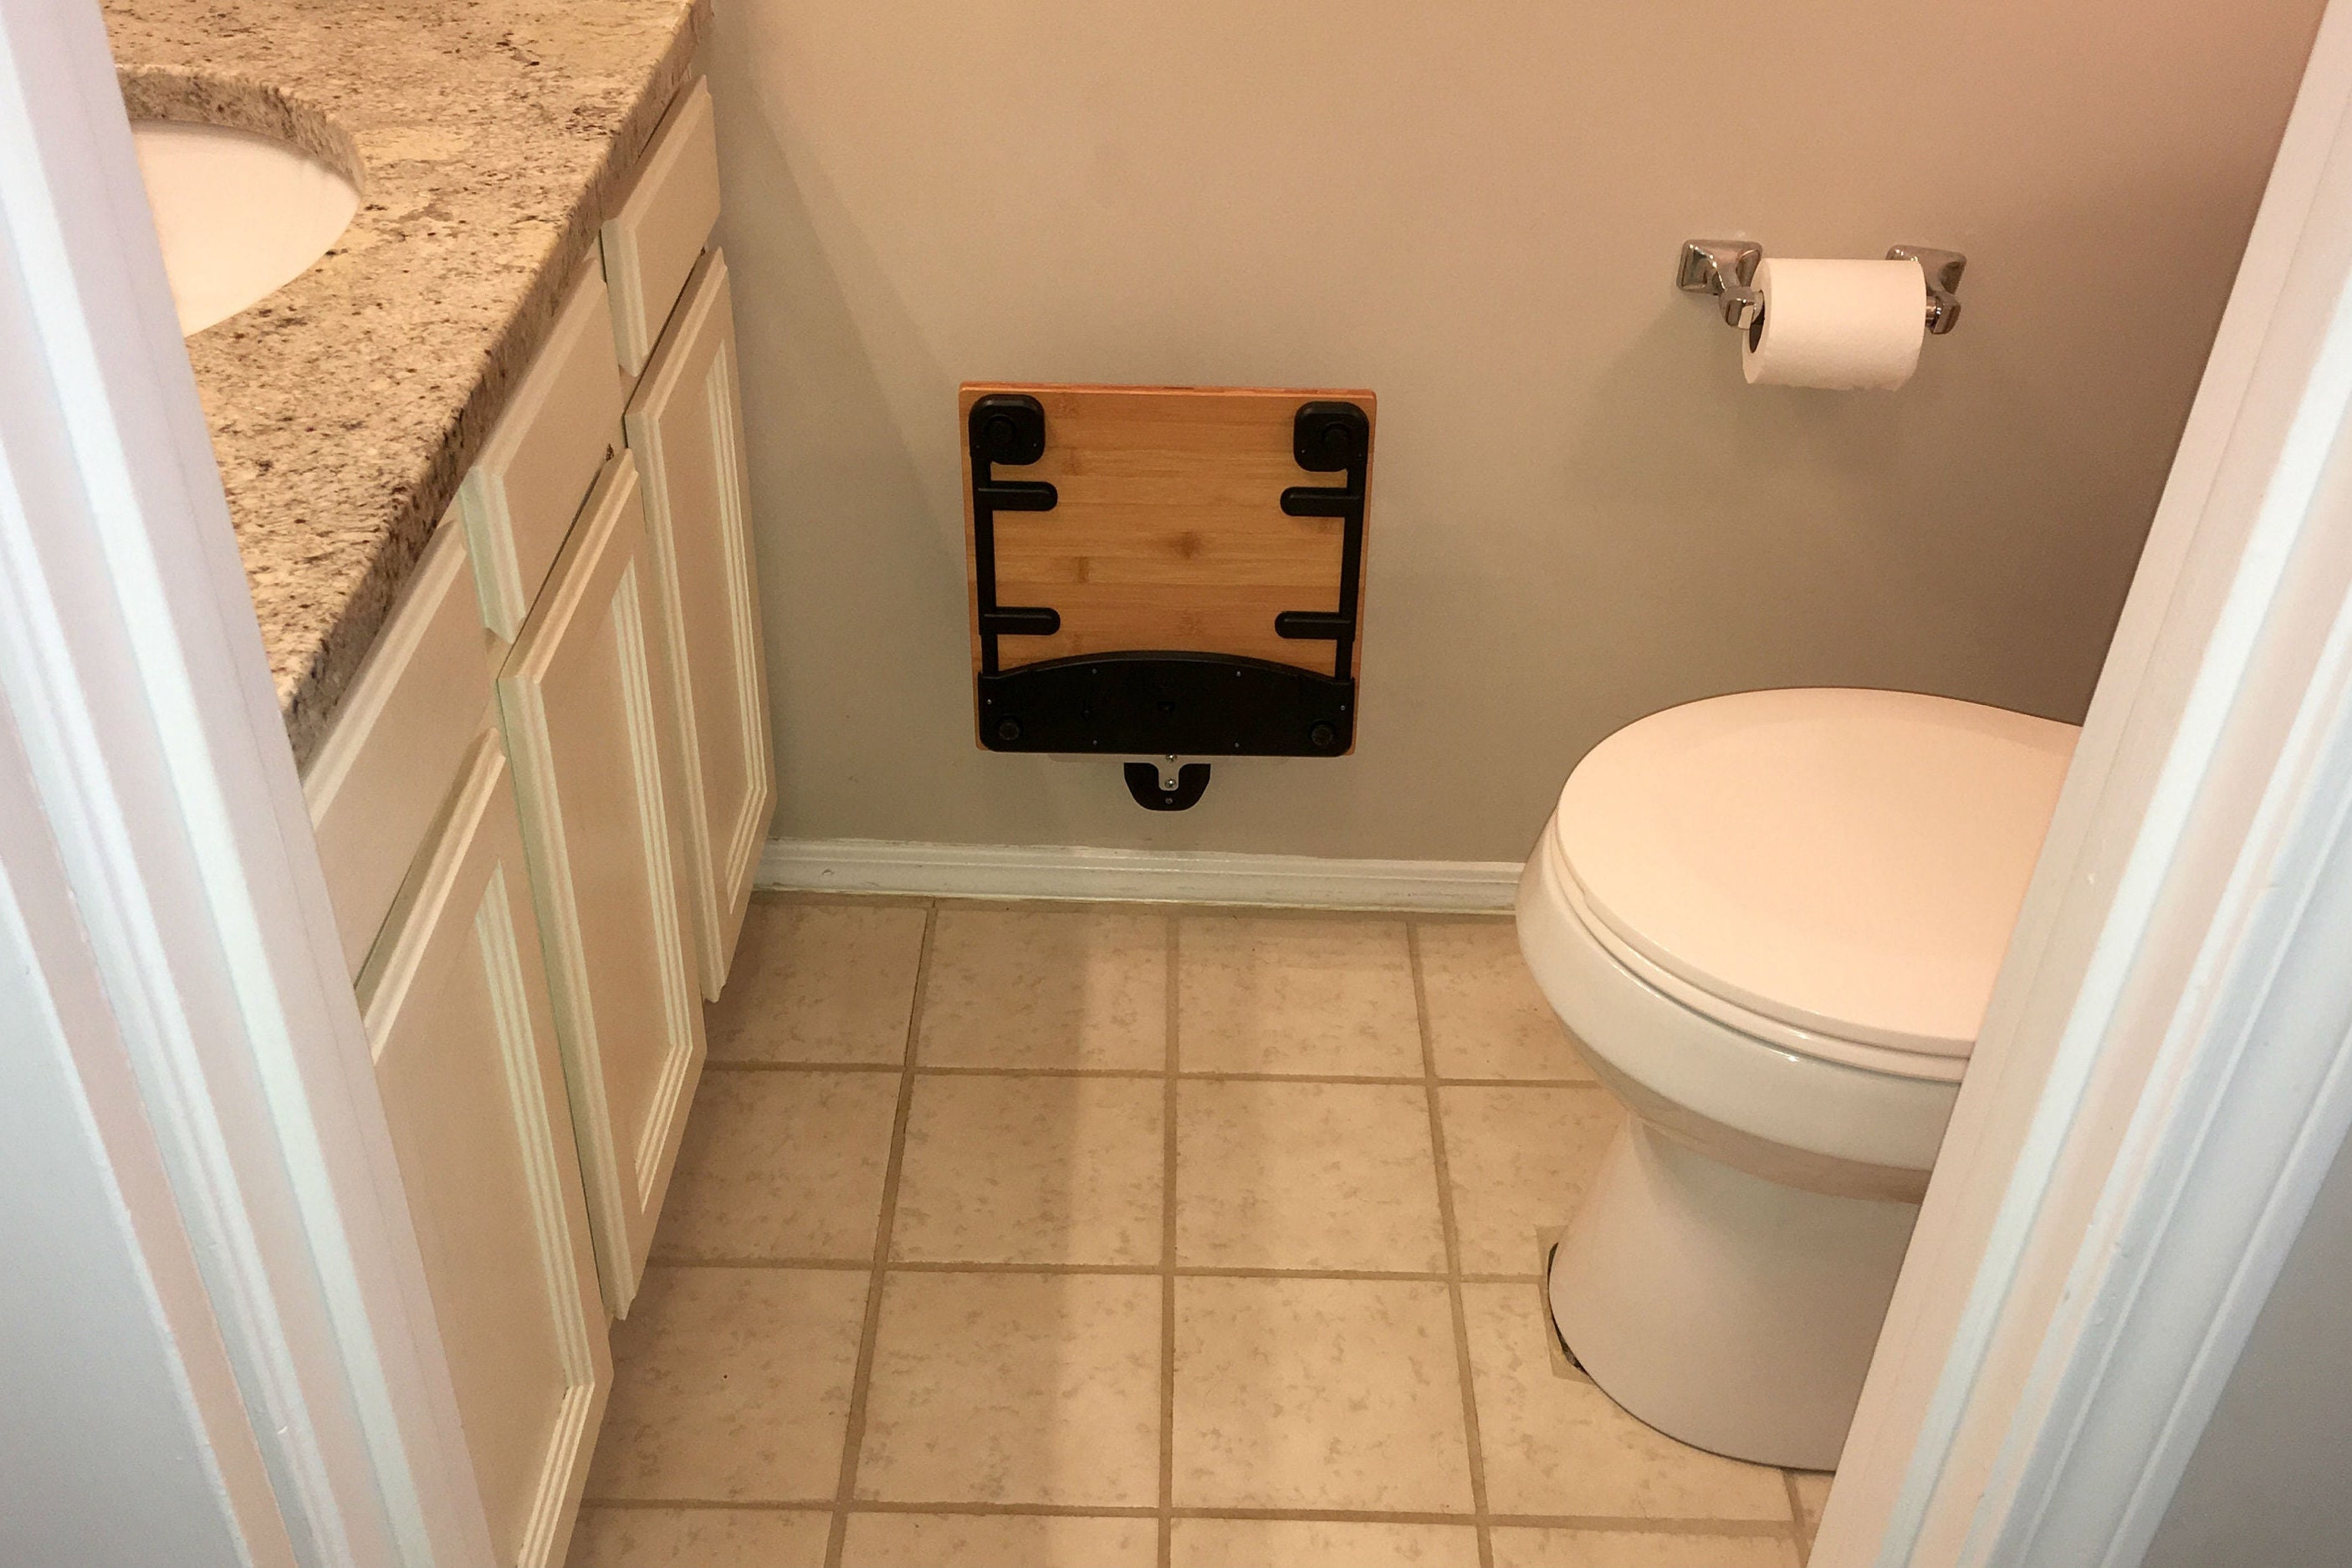 Bathroom Scale Holder Wall Mounting Bracket for Bathroom Scale Storage and  Use That is Easy to Use and Easy to Install for Any Bathrooom 